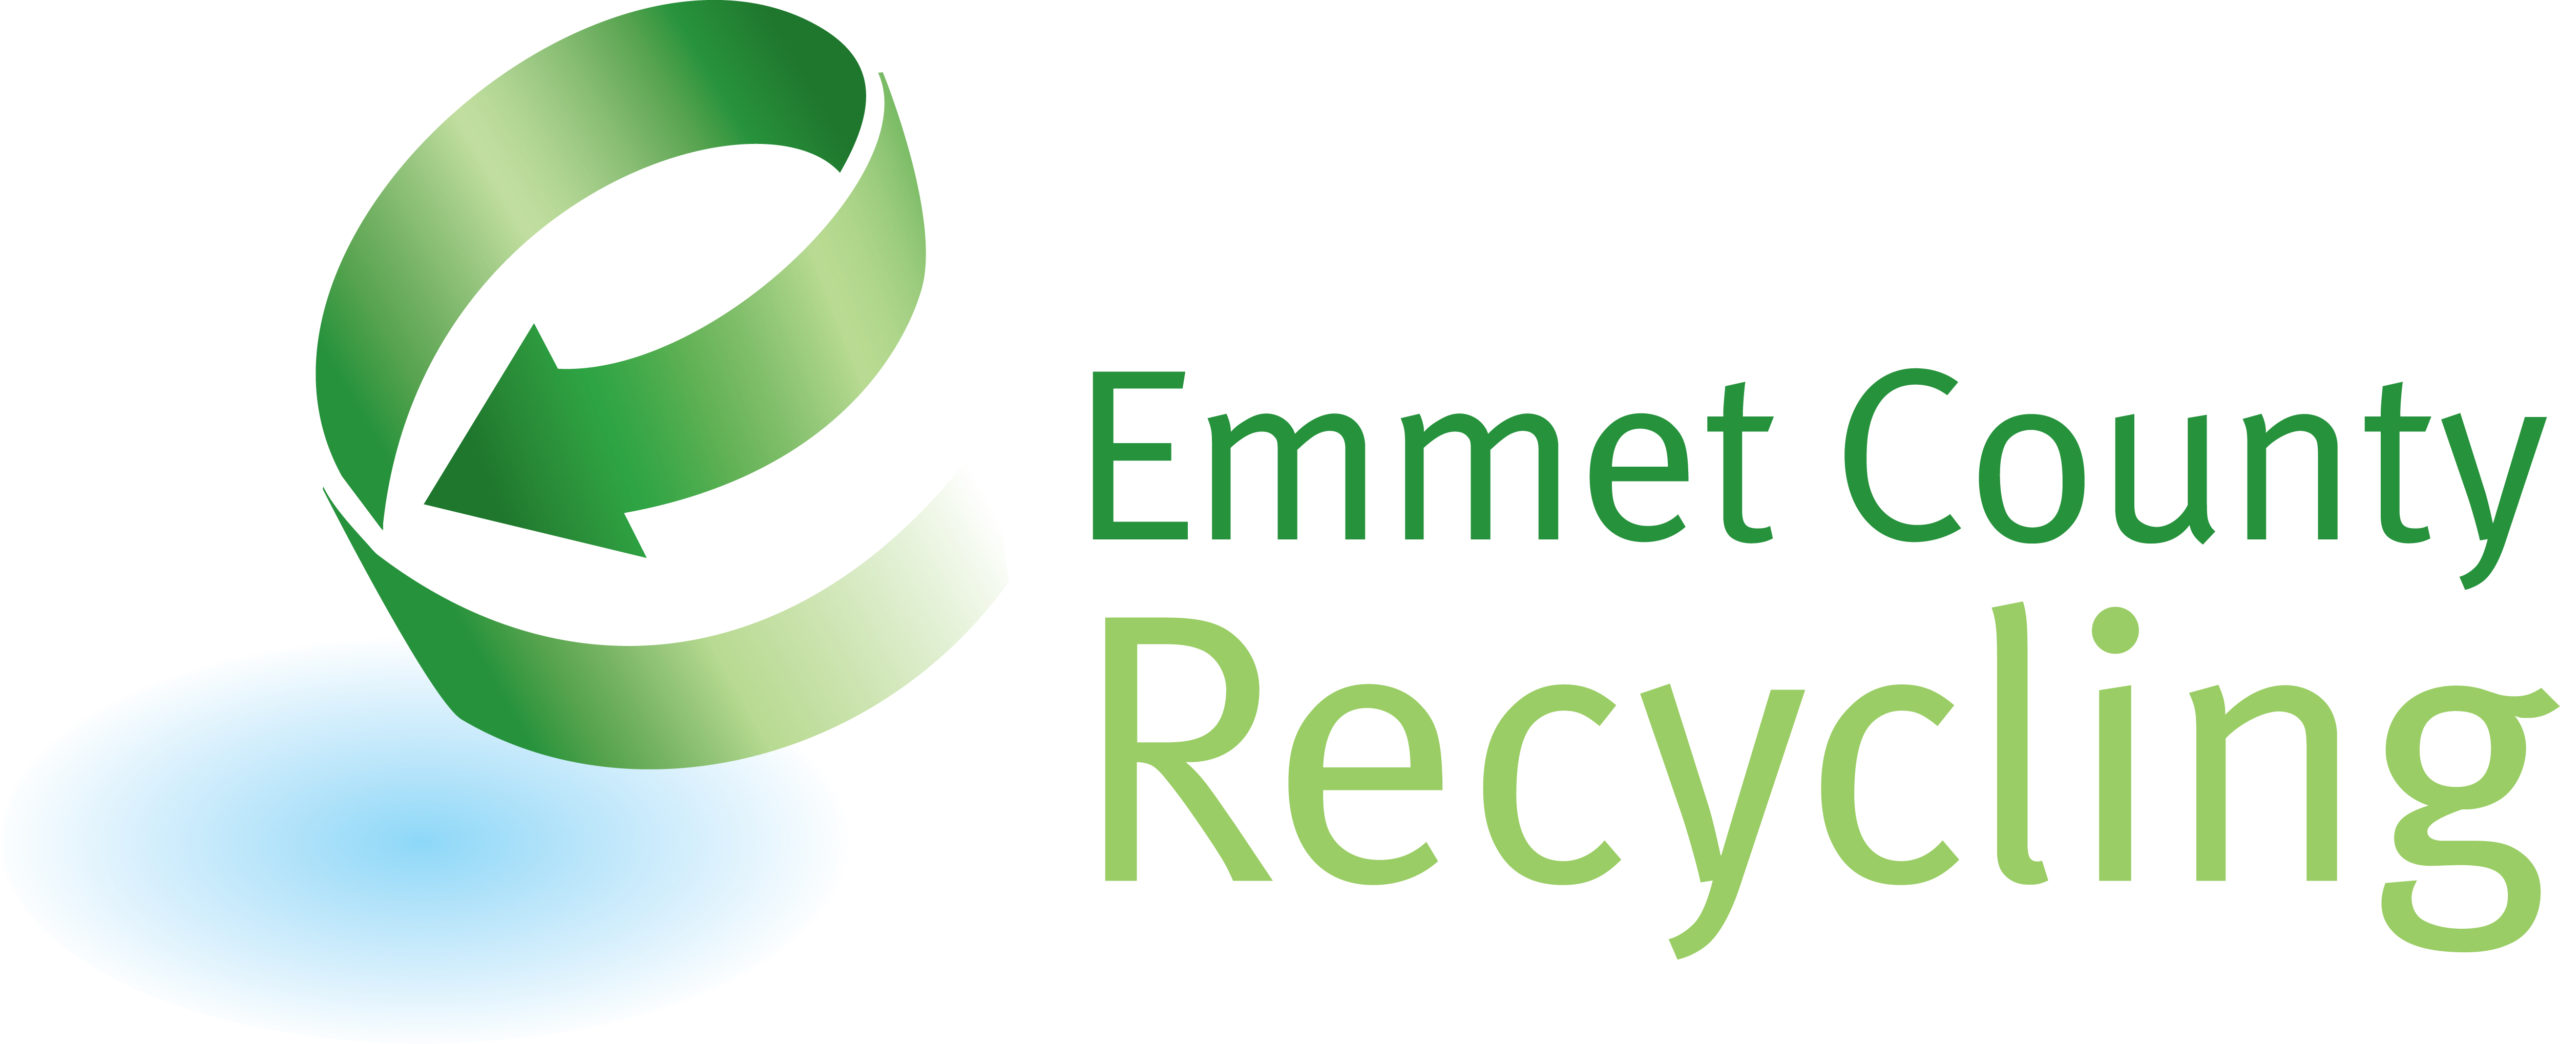 Emmet County Recycling Logo